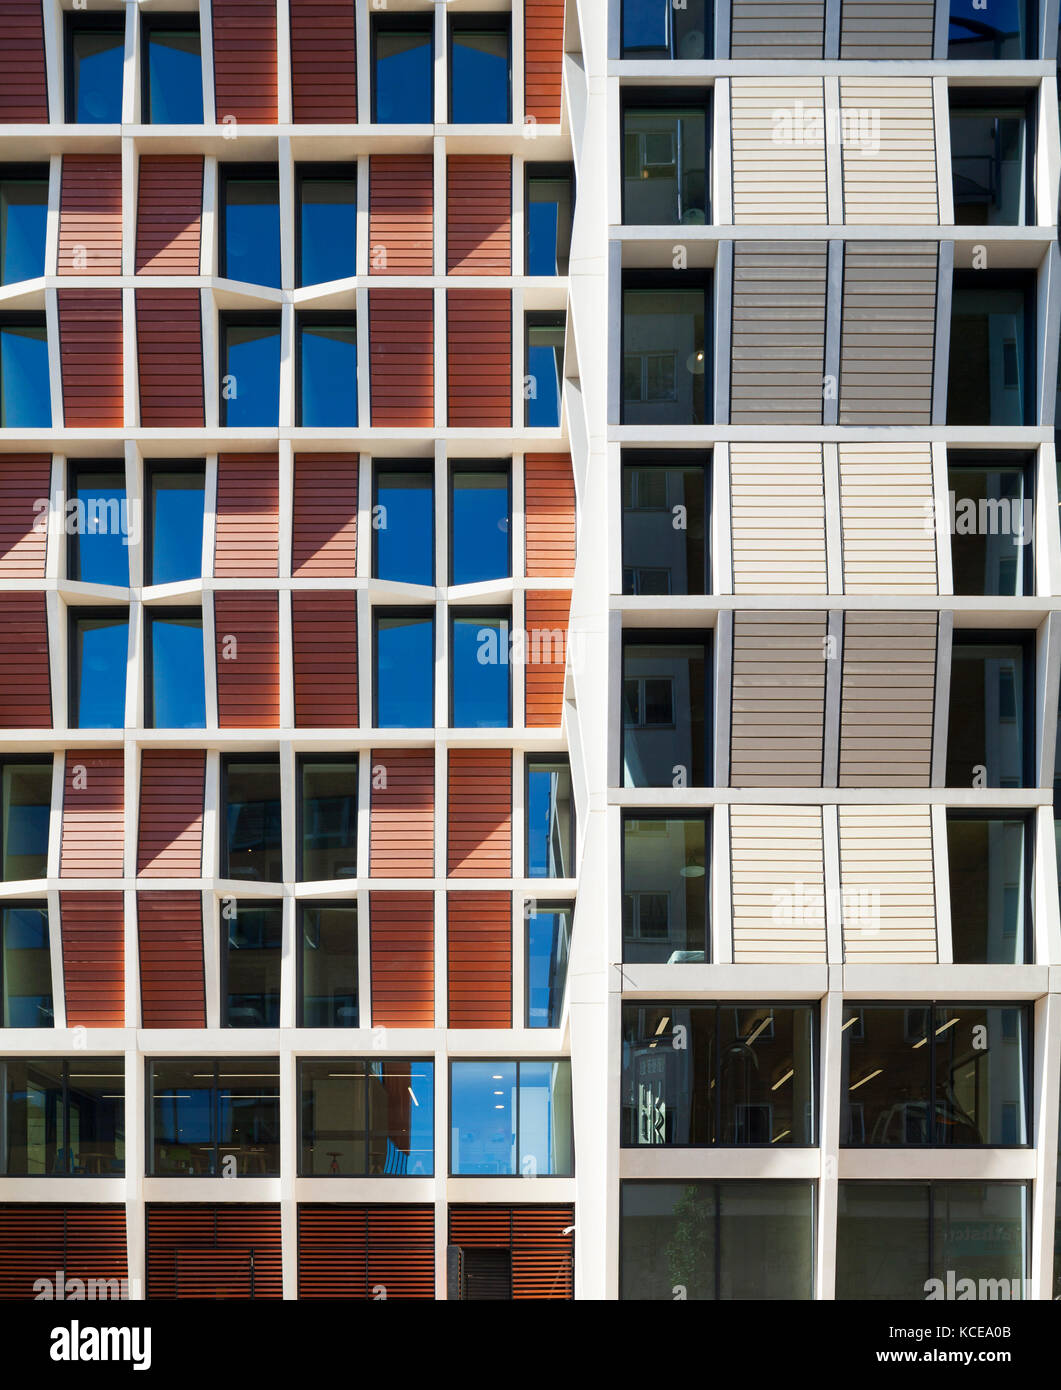 Patterns formed from the windows and cladding on the facade of student accommodation in London. The structure comprises a reinforced concrete frame wi Stock Photo